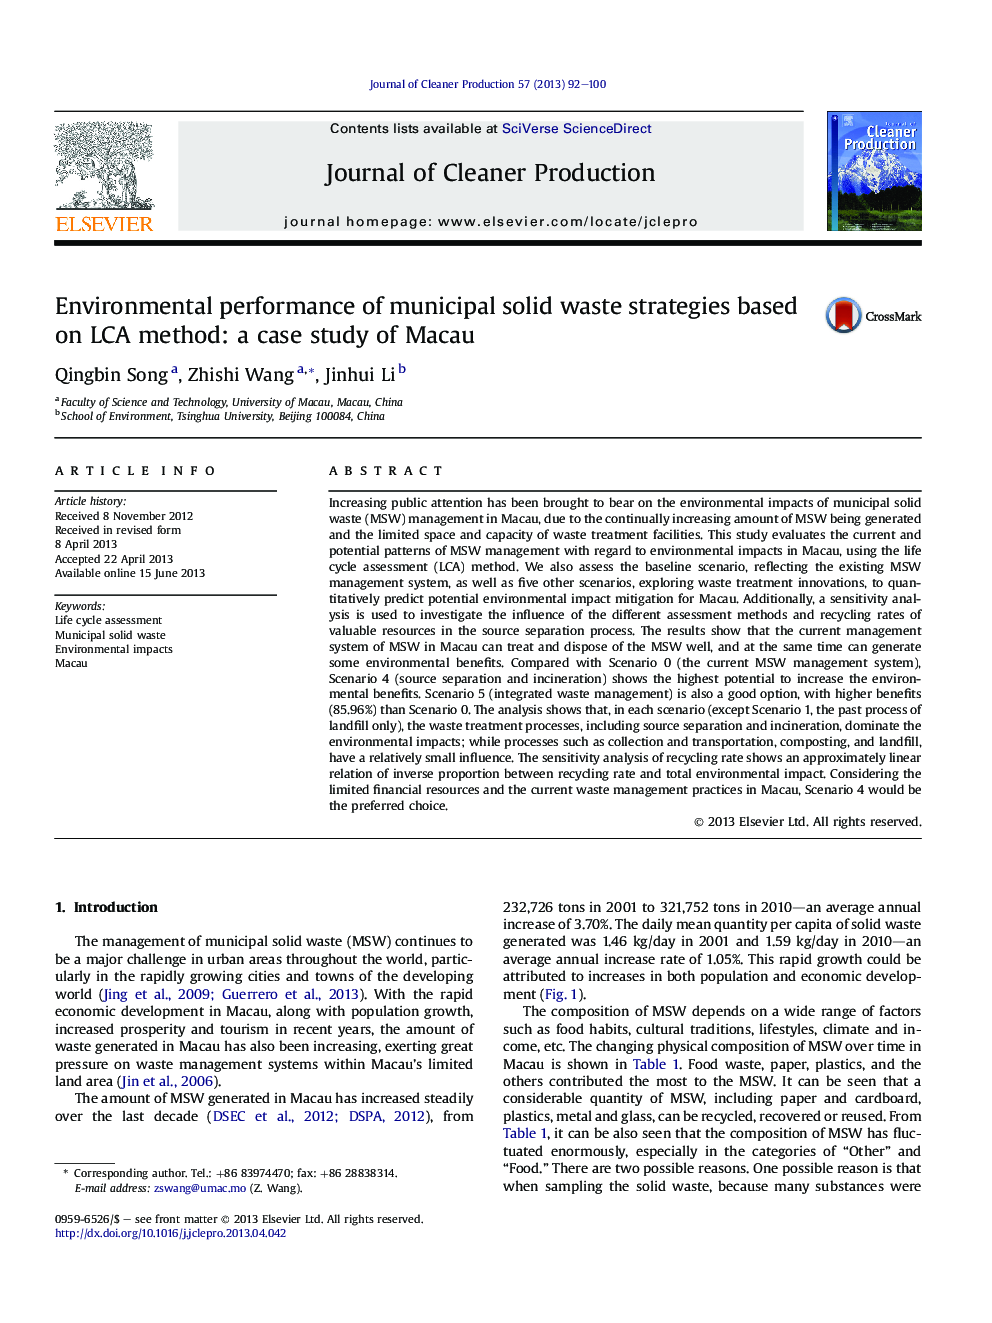 Environmental performance of municipal solid waste strategies based on LCA method: a case study of Macau